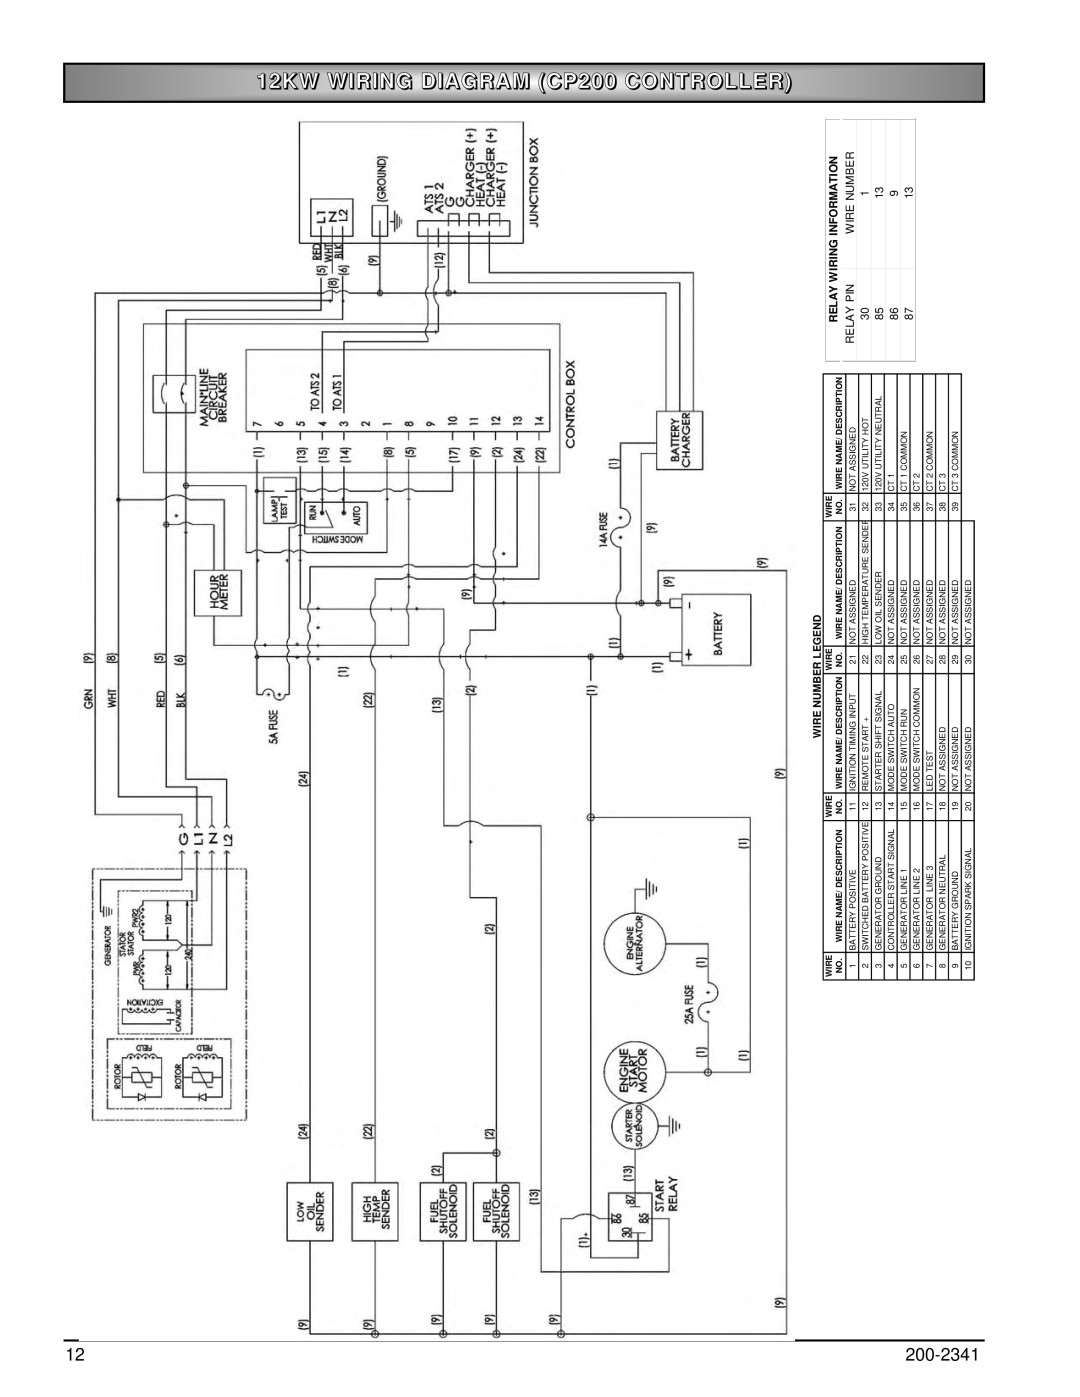 Powermate PM400911 owner manual 12KW WIRING DIAGRAM CP200 CONTROLLER, Relay Wiring Information, Relay Pin, Wire Number 